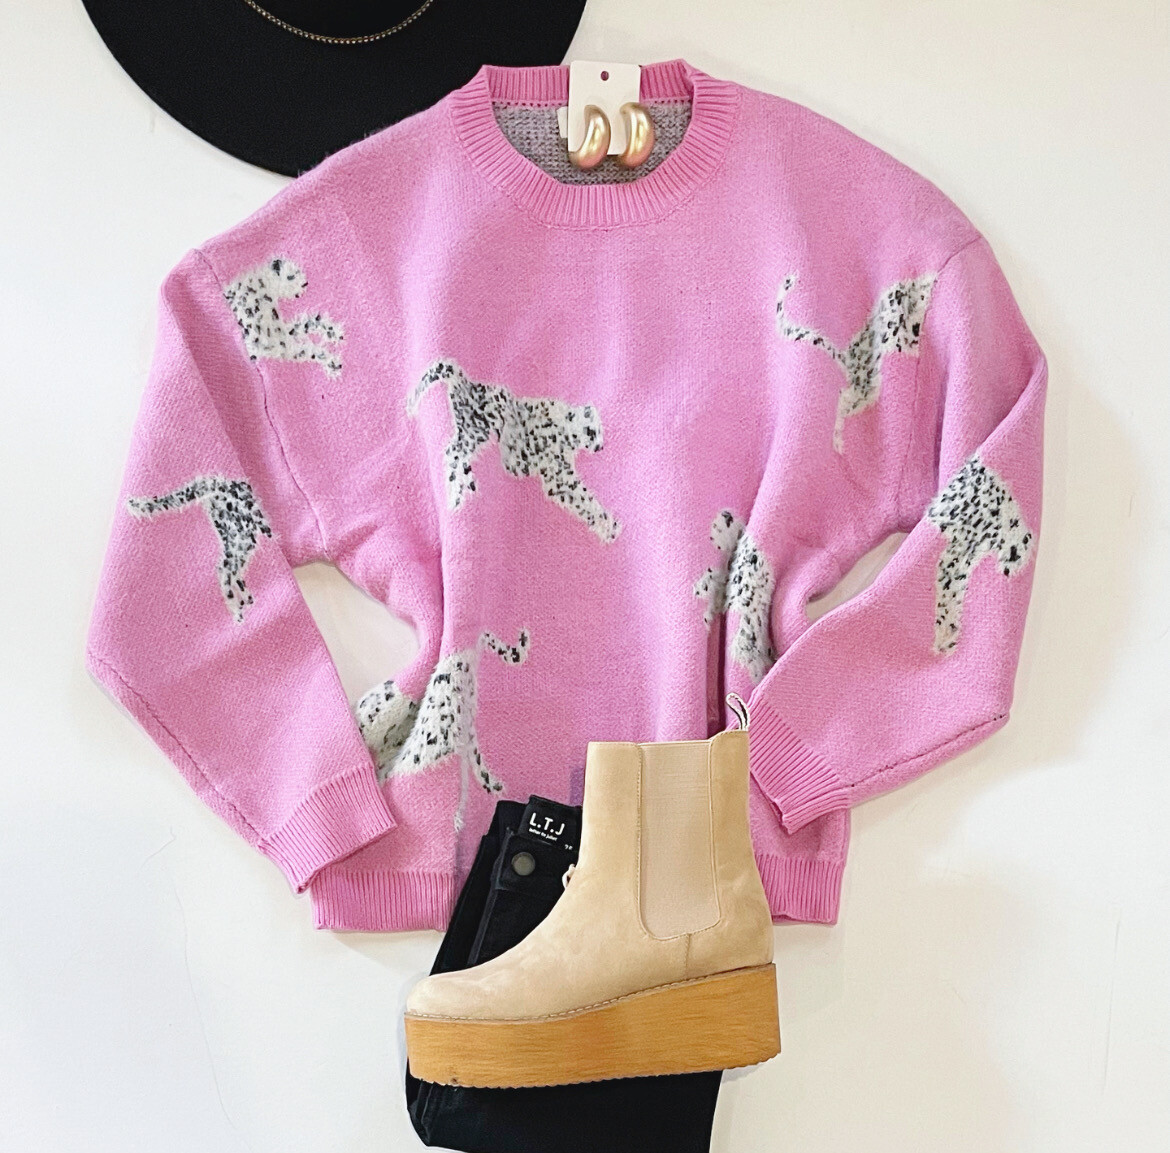 On The Prowl Cheetah Sweater